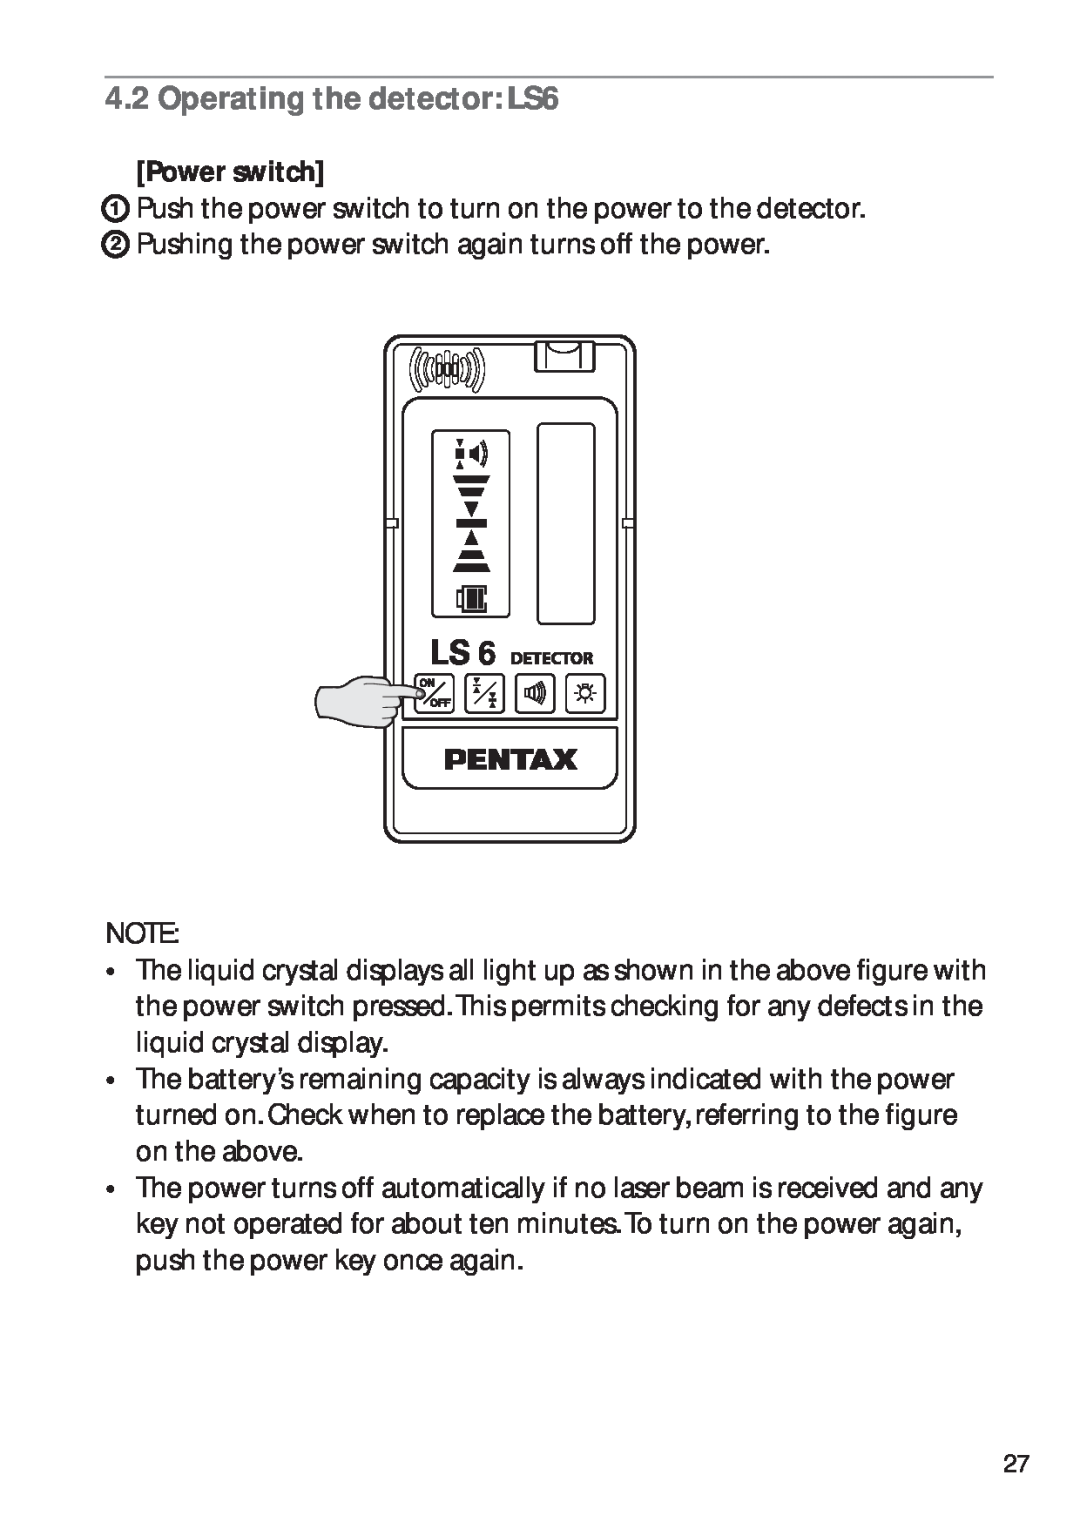 Pentax PLP-602R, PLP-601R instruction manual Operating the detector LS6, Power switch 